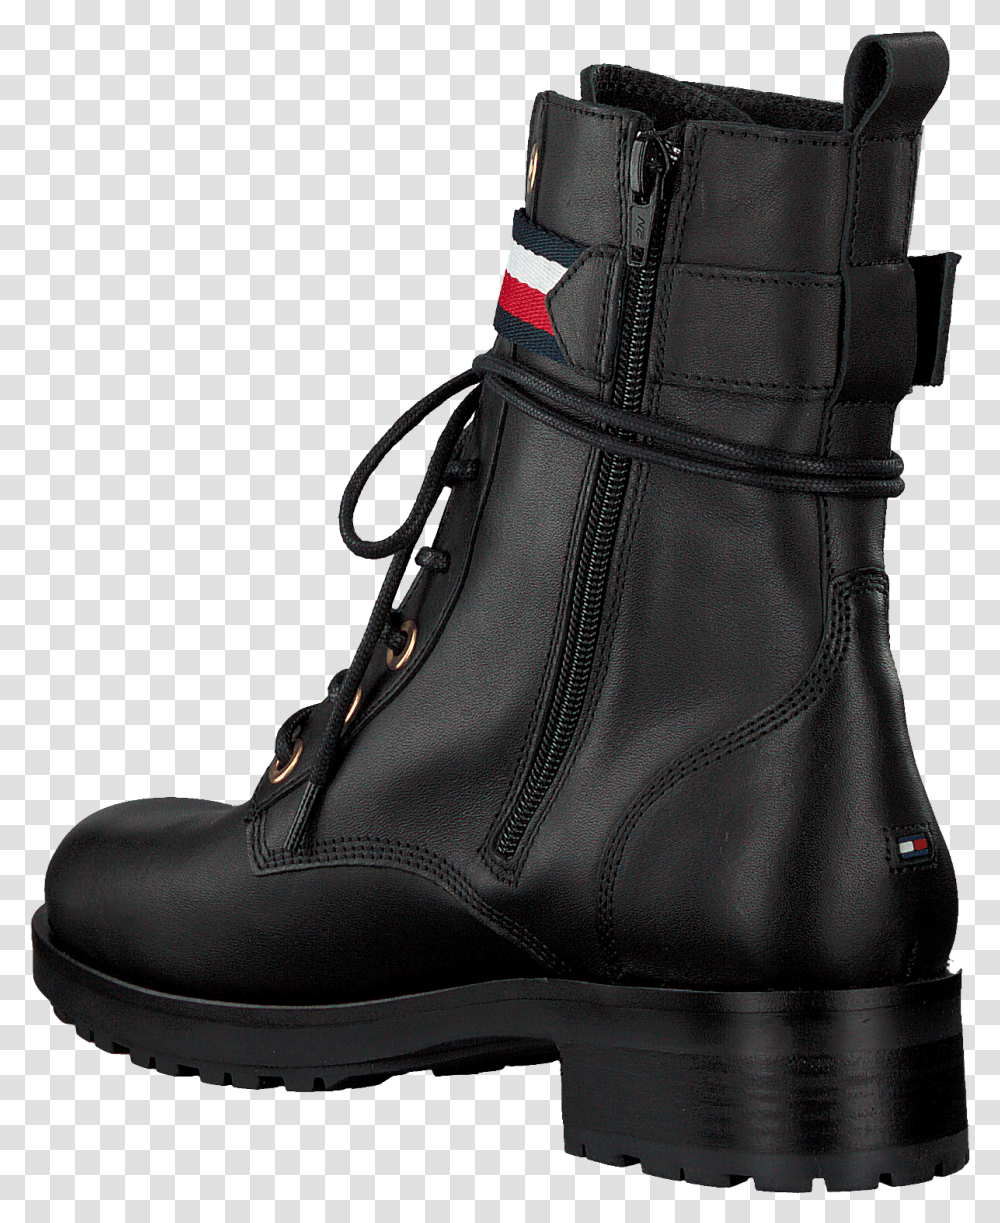 Black Tommy Hilfiger Biker Boots Corporate Ribbon Work Boots, Apparel, Footwear, Riding Boot Transparent Png